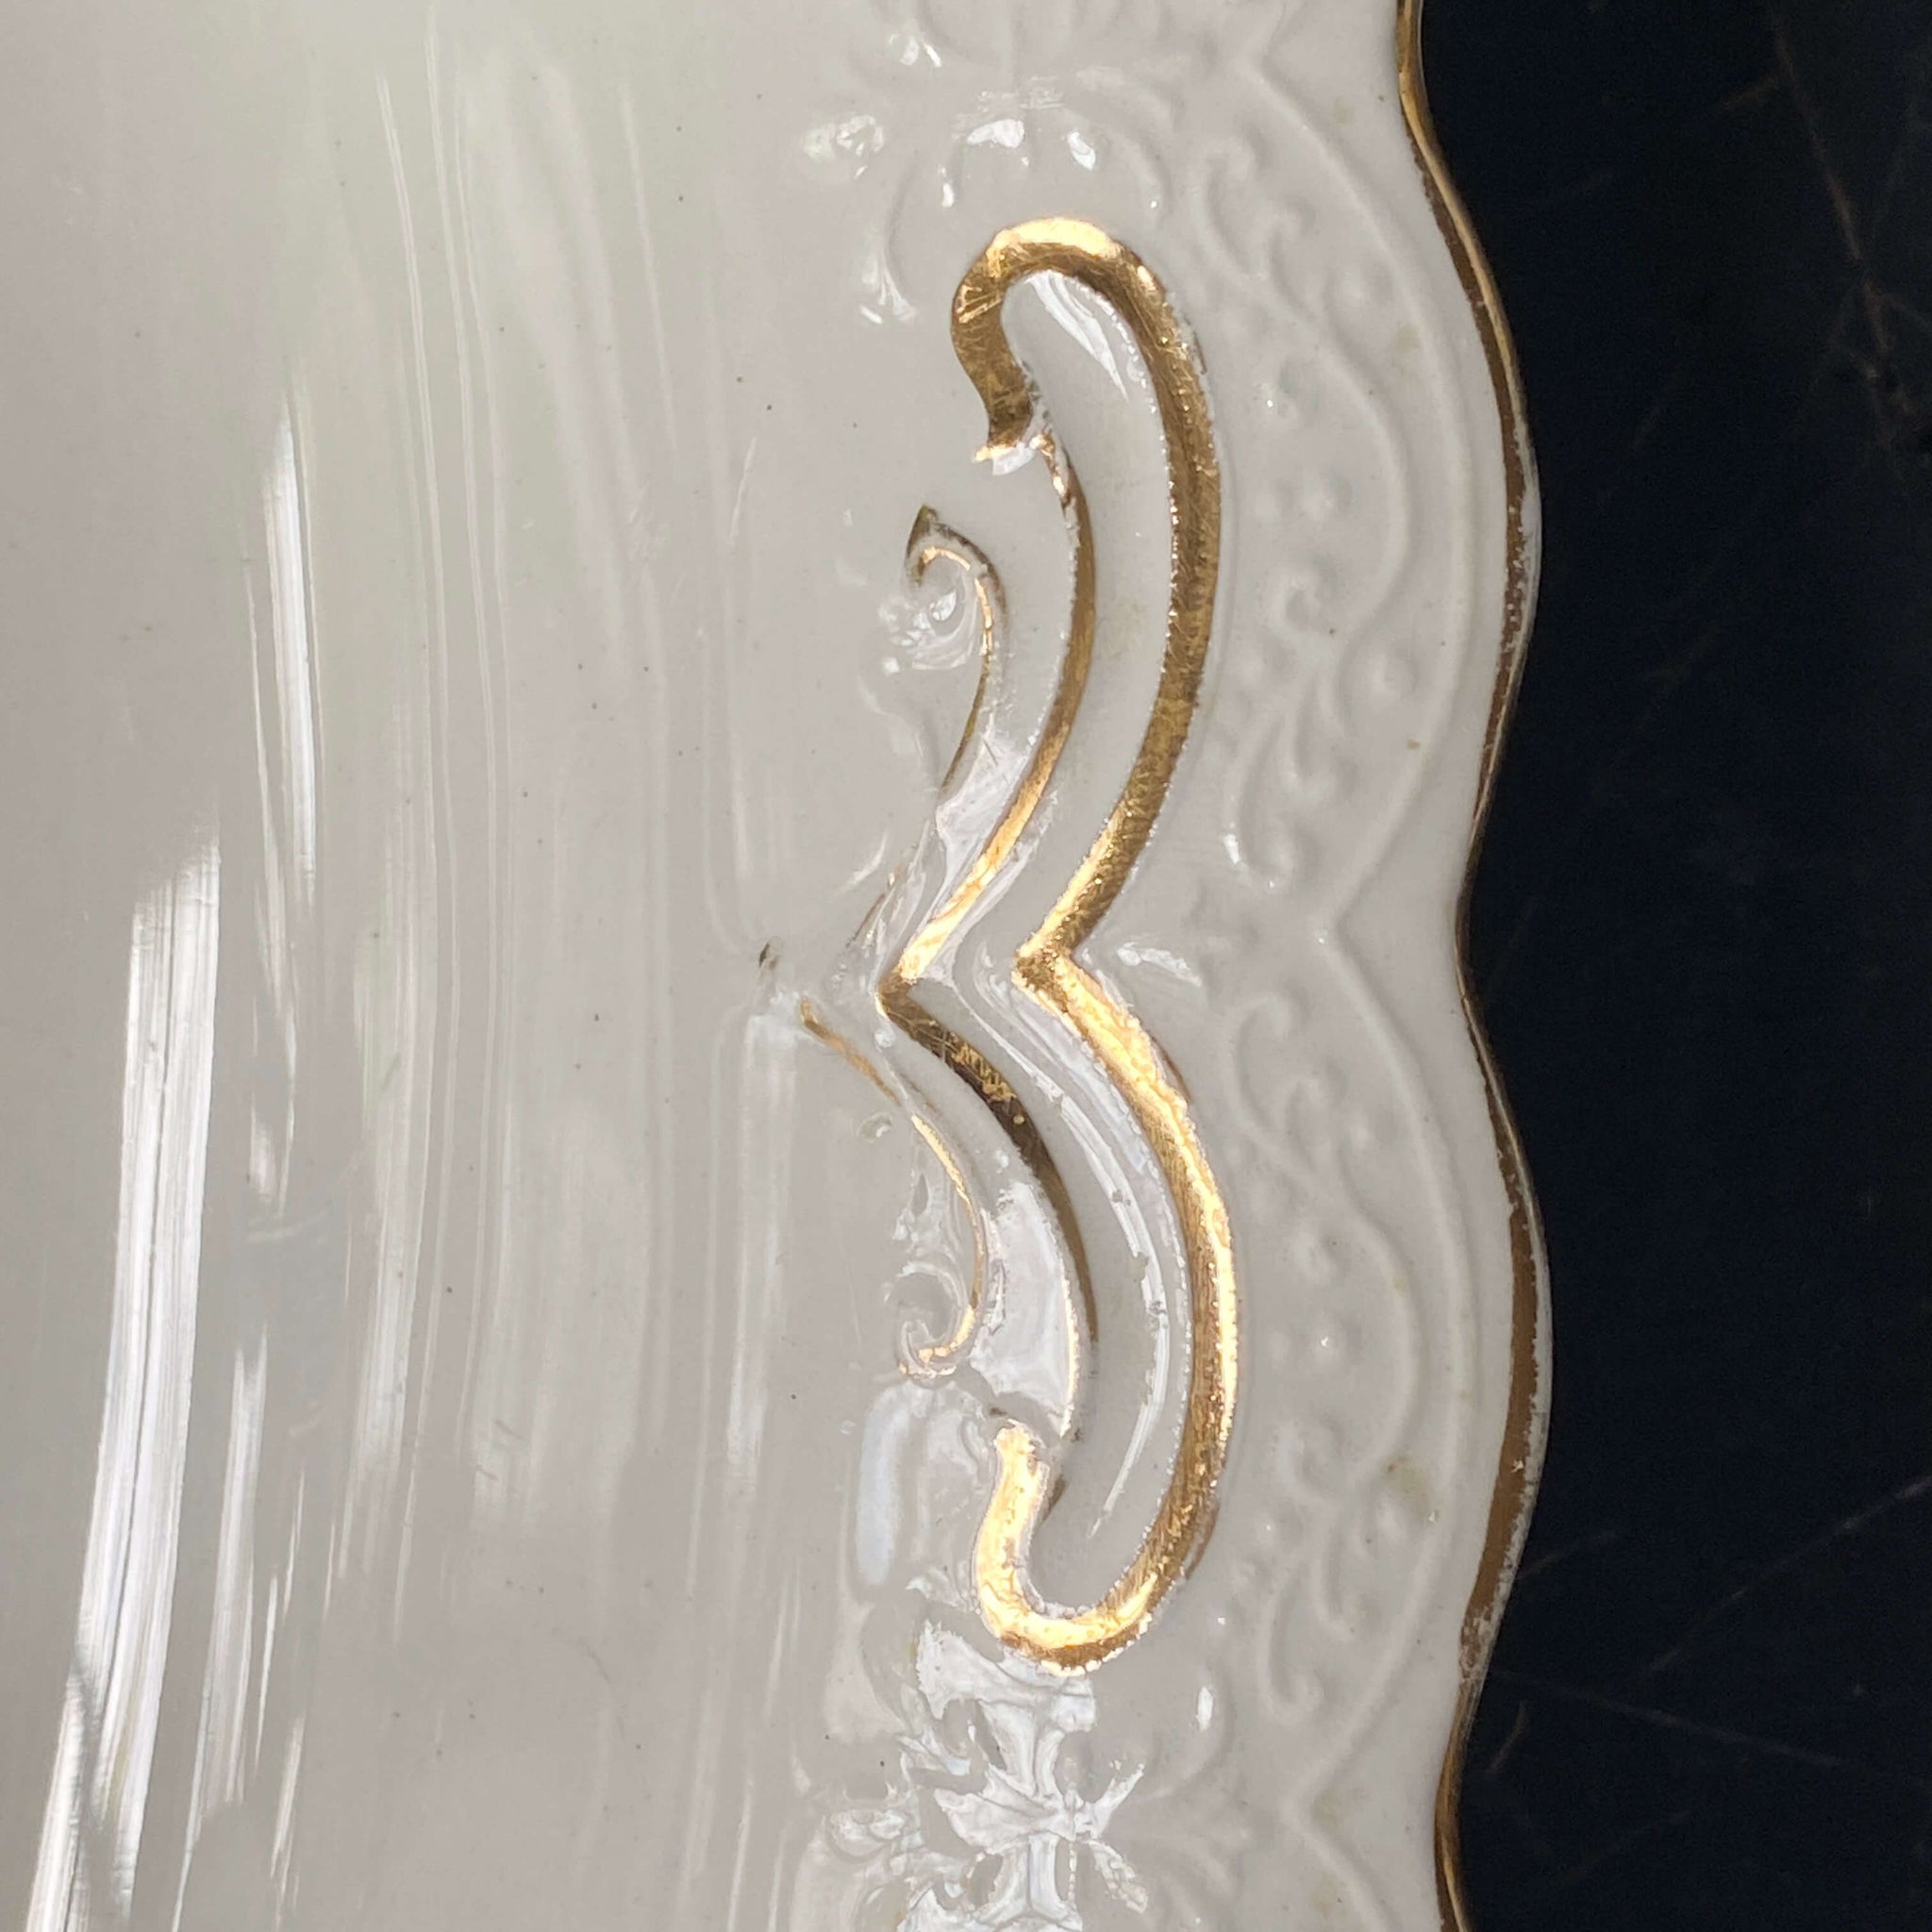 Antique J & G Meakin Platter with Handpainted Gold Designs and Embossed Edge circa 1890